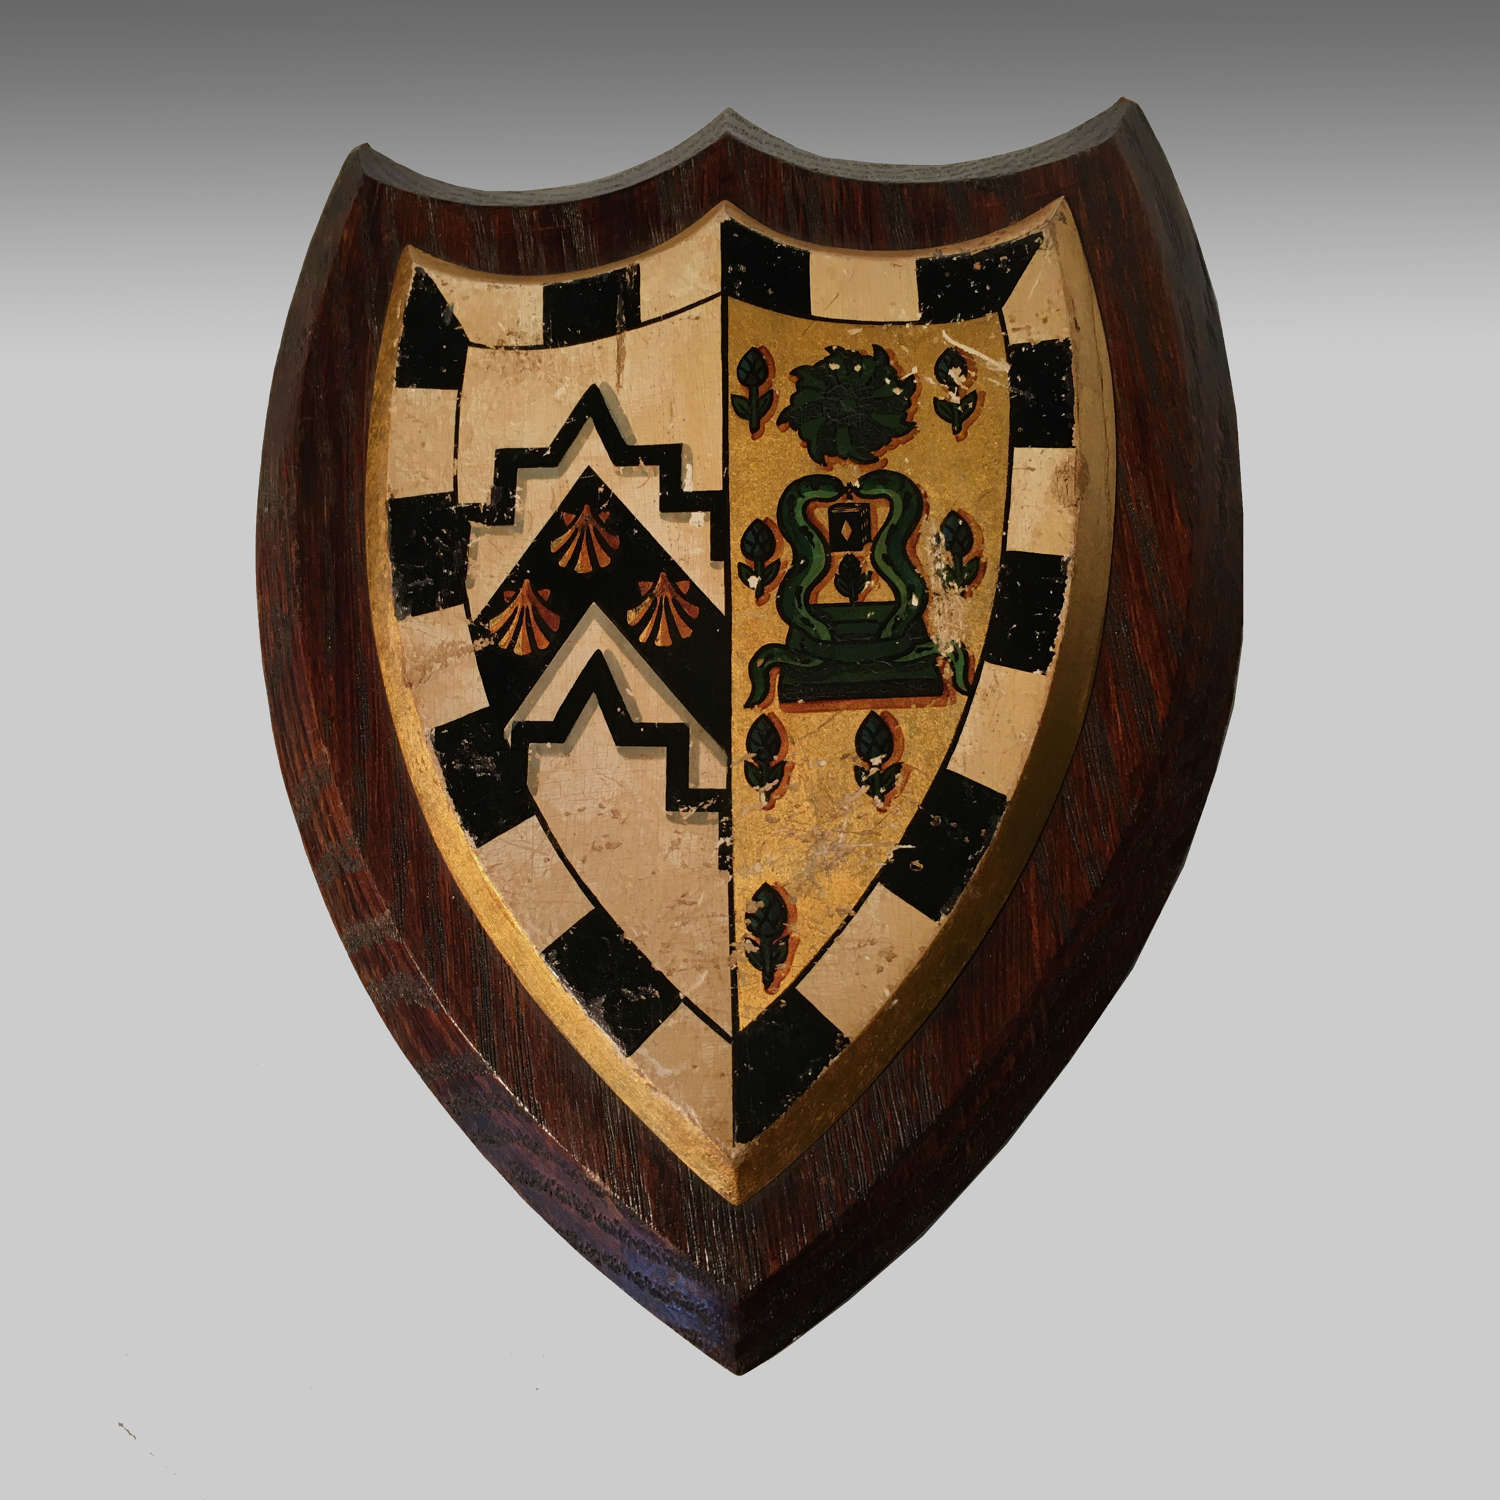 Armorial oak shield - the arms for Gonville & Caius College, Cambridge